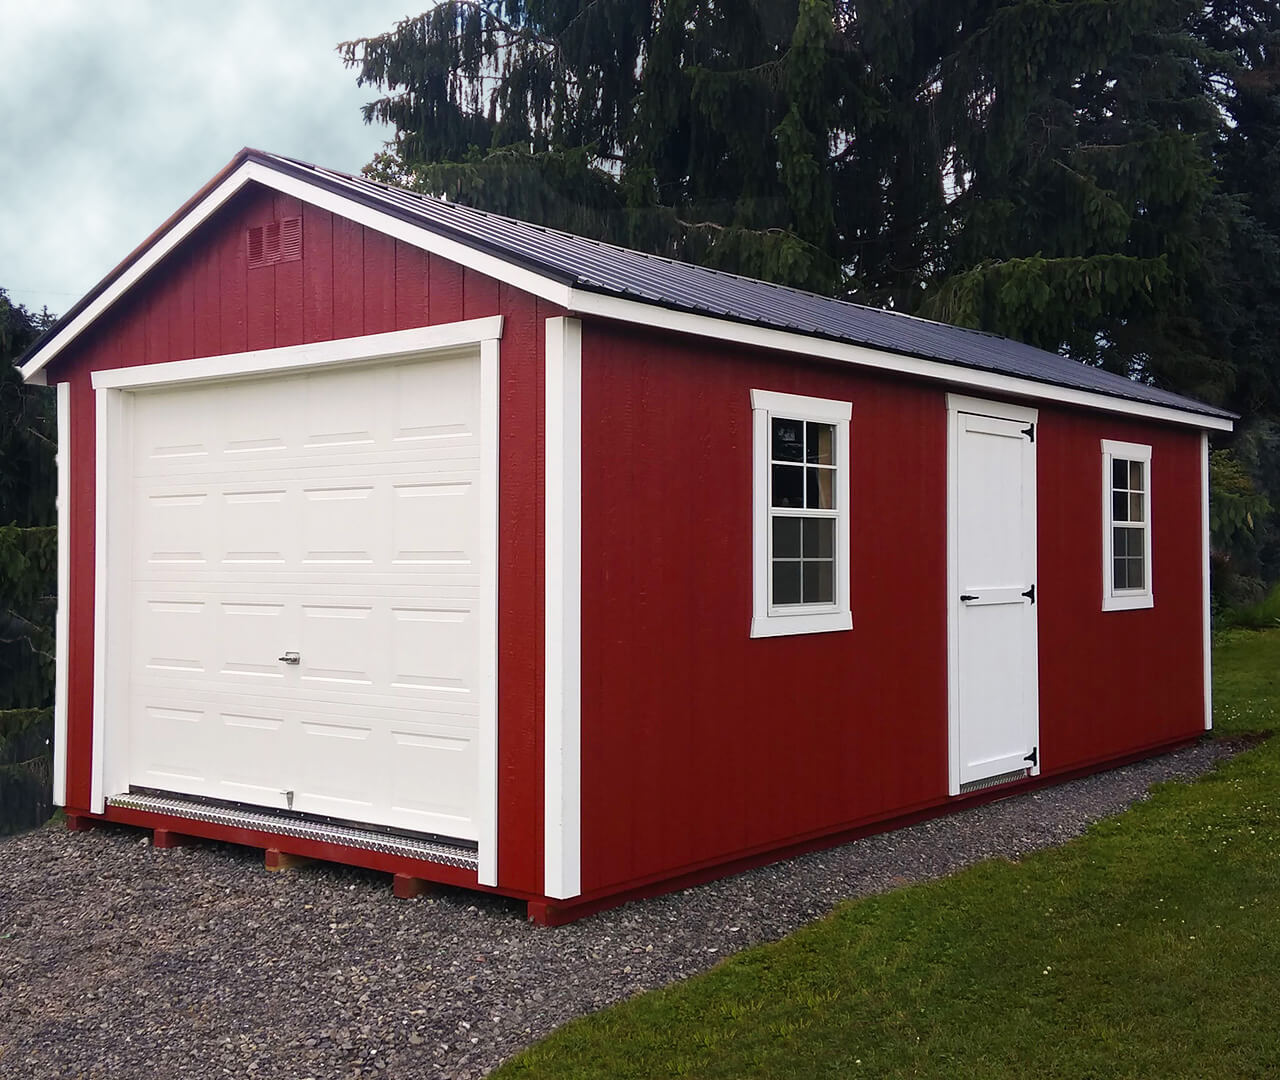 Red shed with white trim